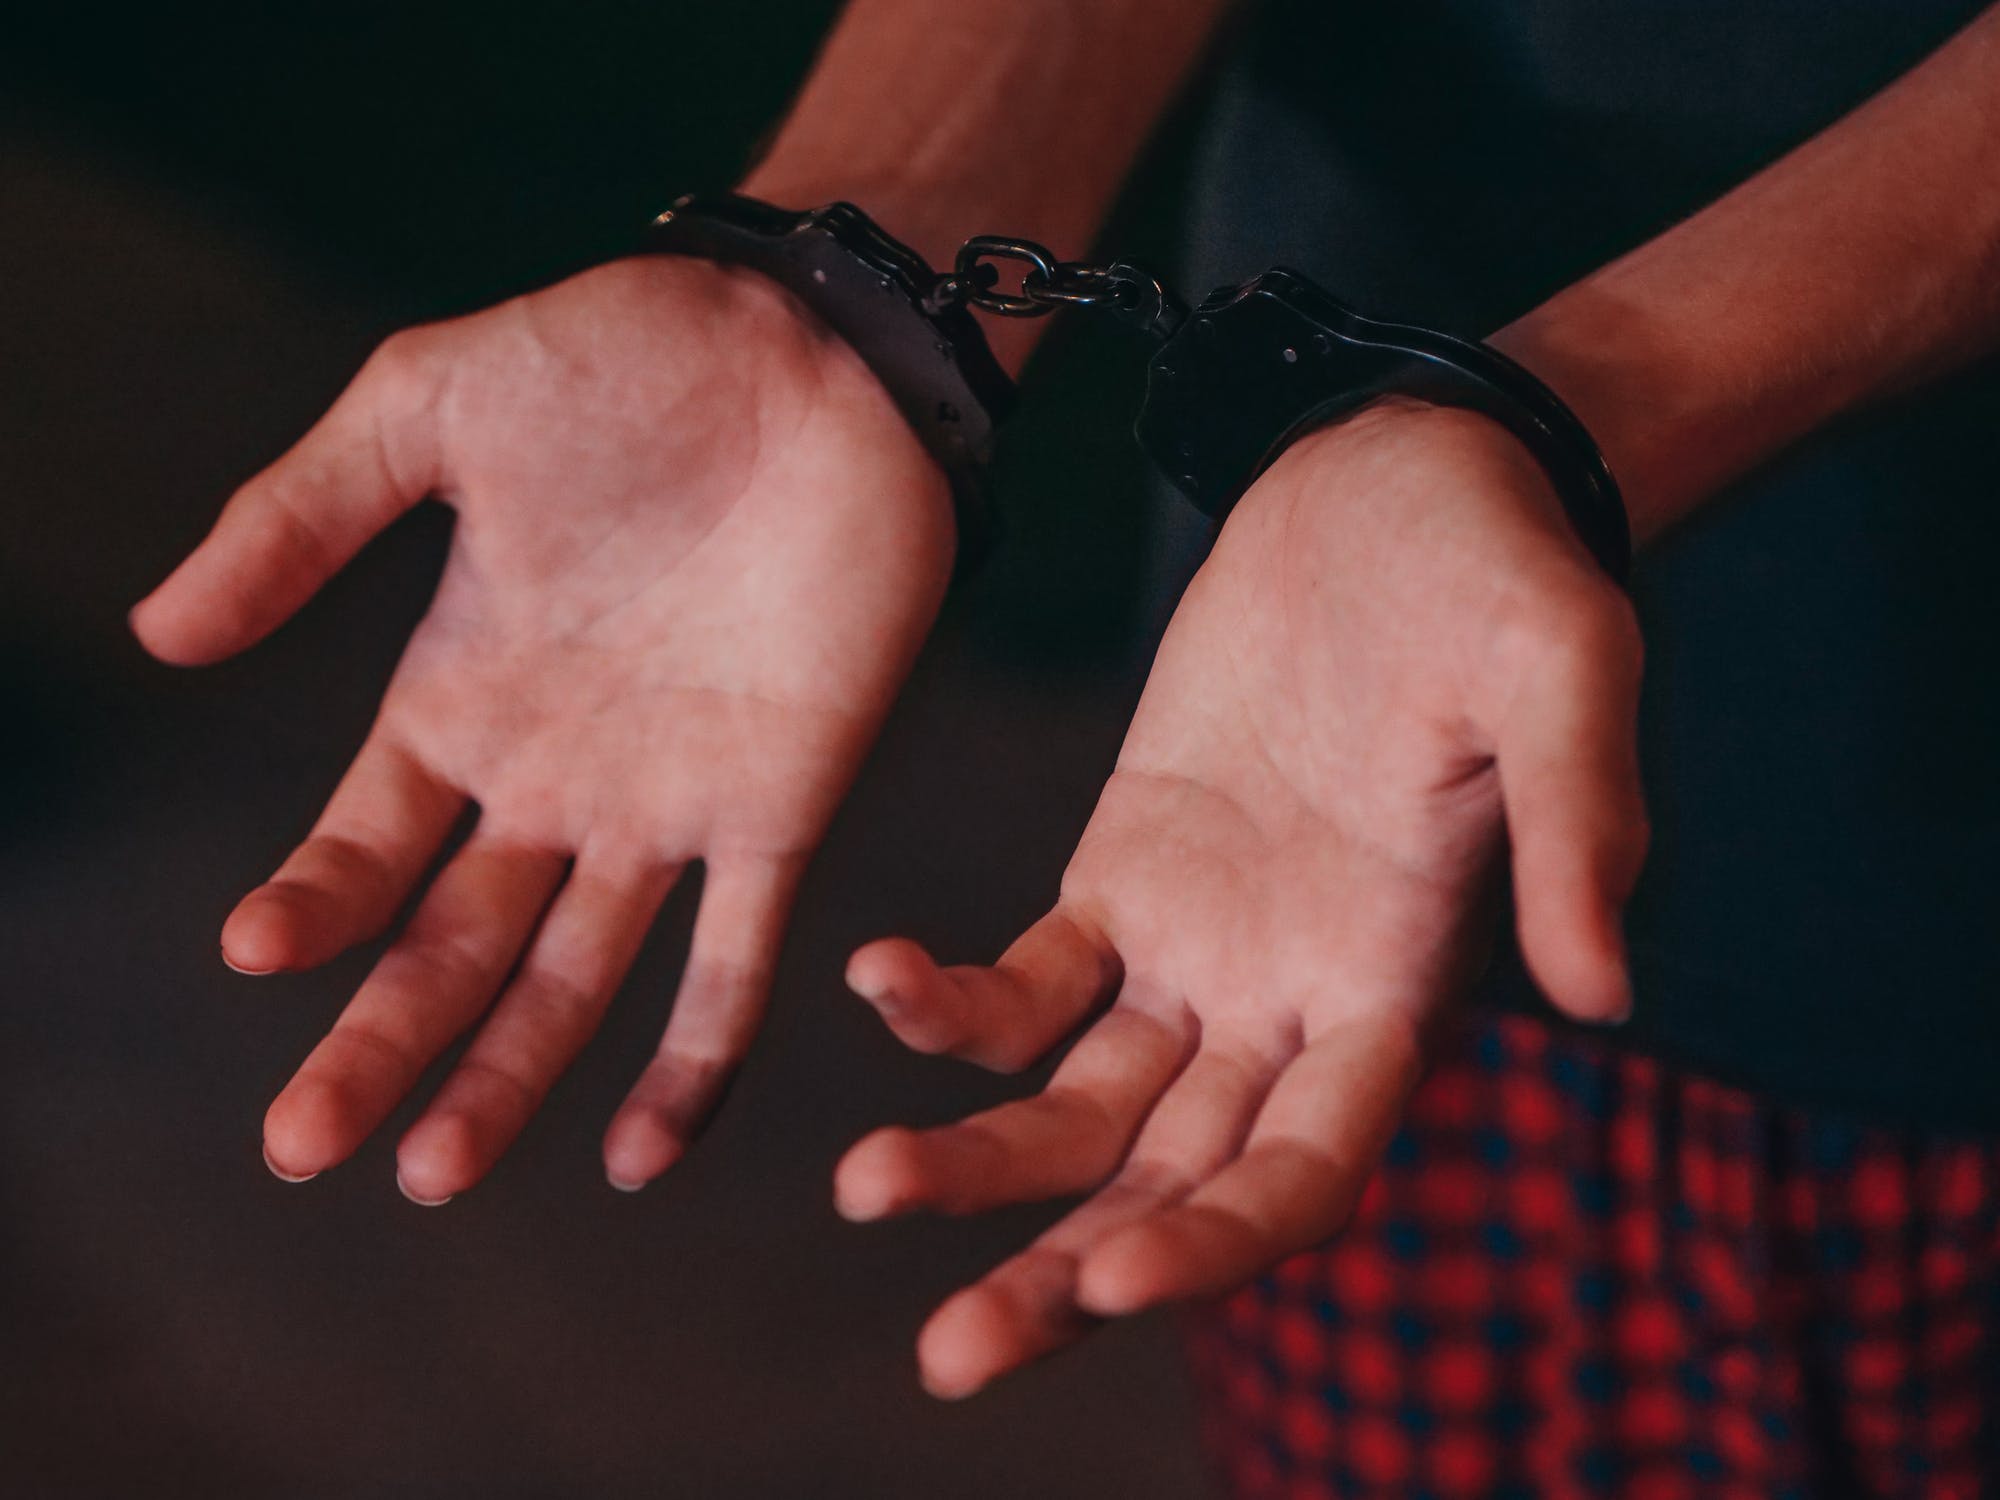 Donny was given a choice between being arrested or doing community service | Source: Pexels